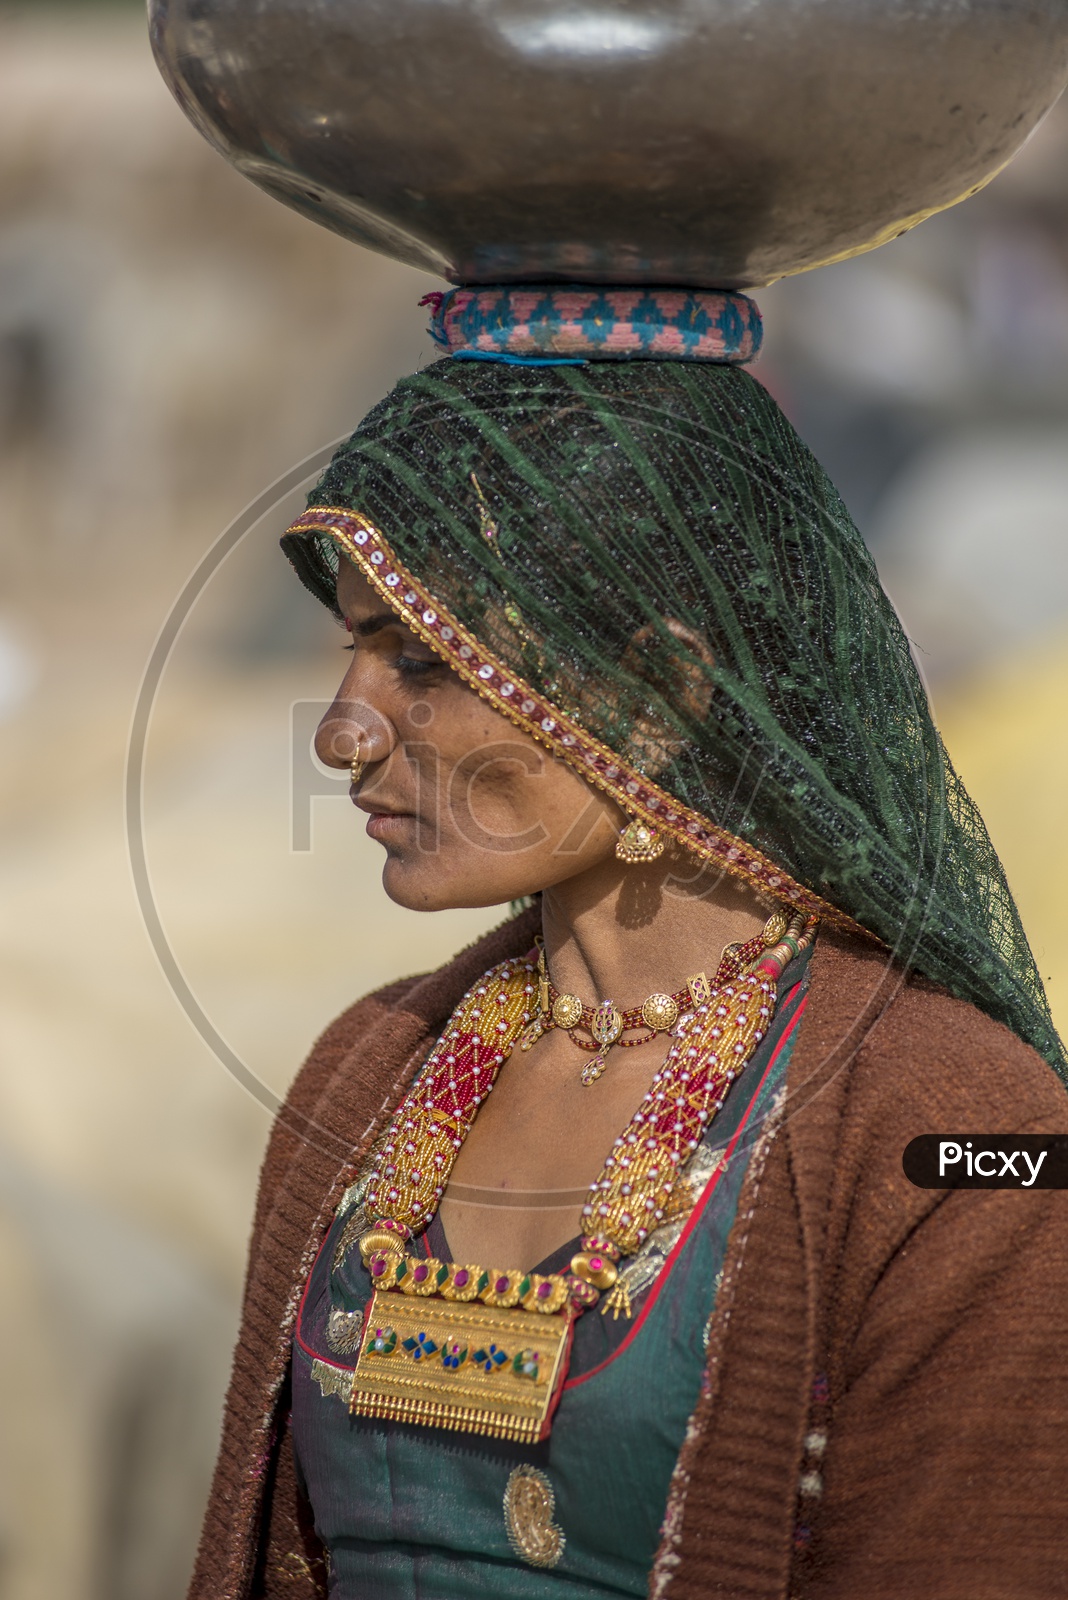 Rajasthani Woman Carrying water pot on her head